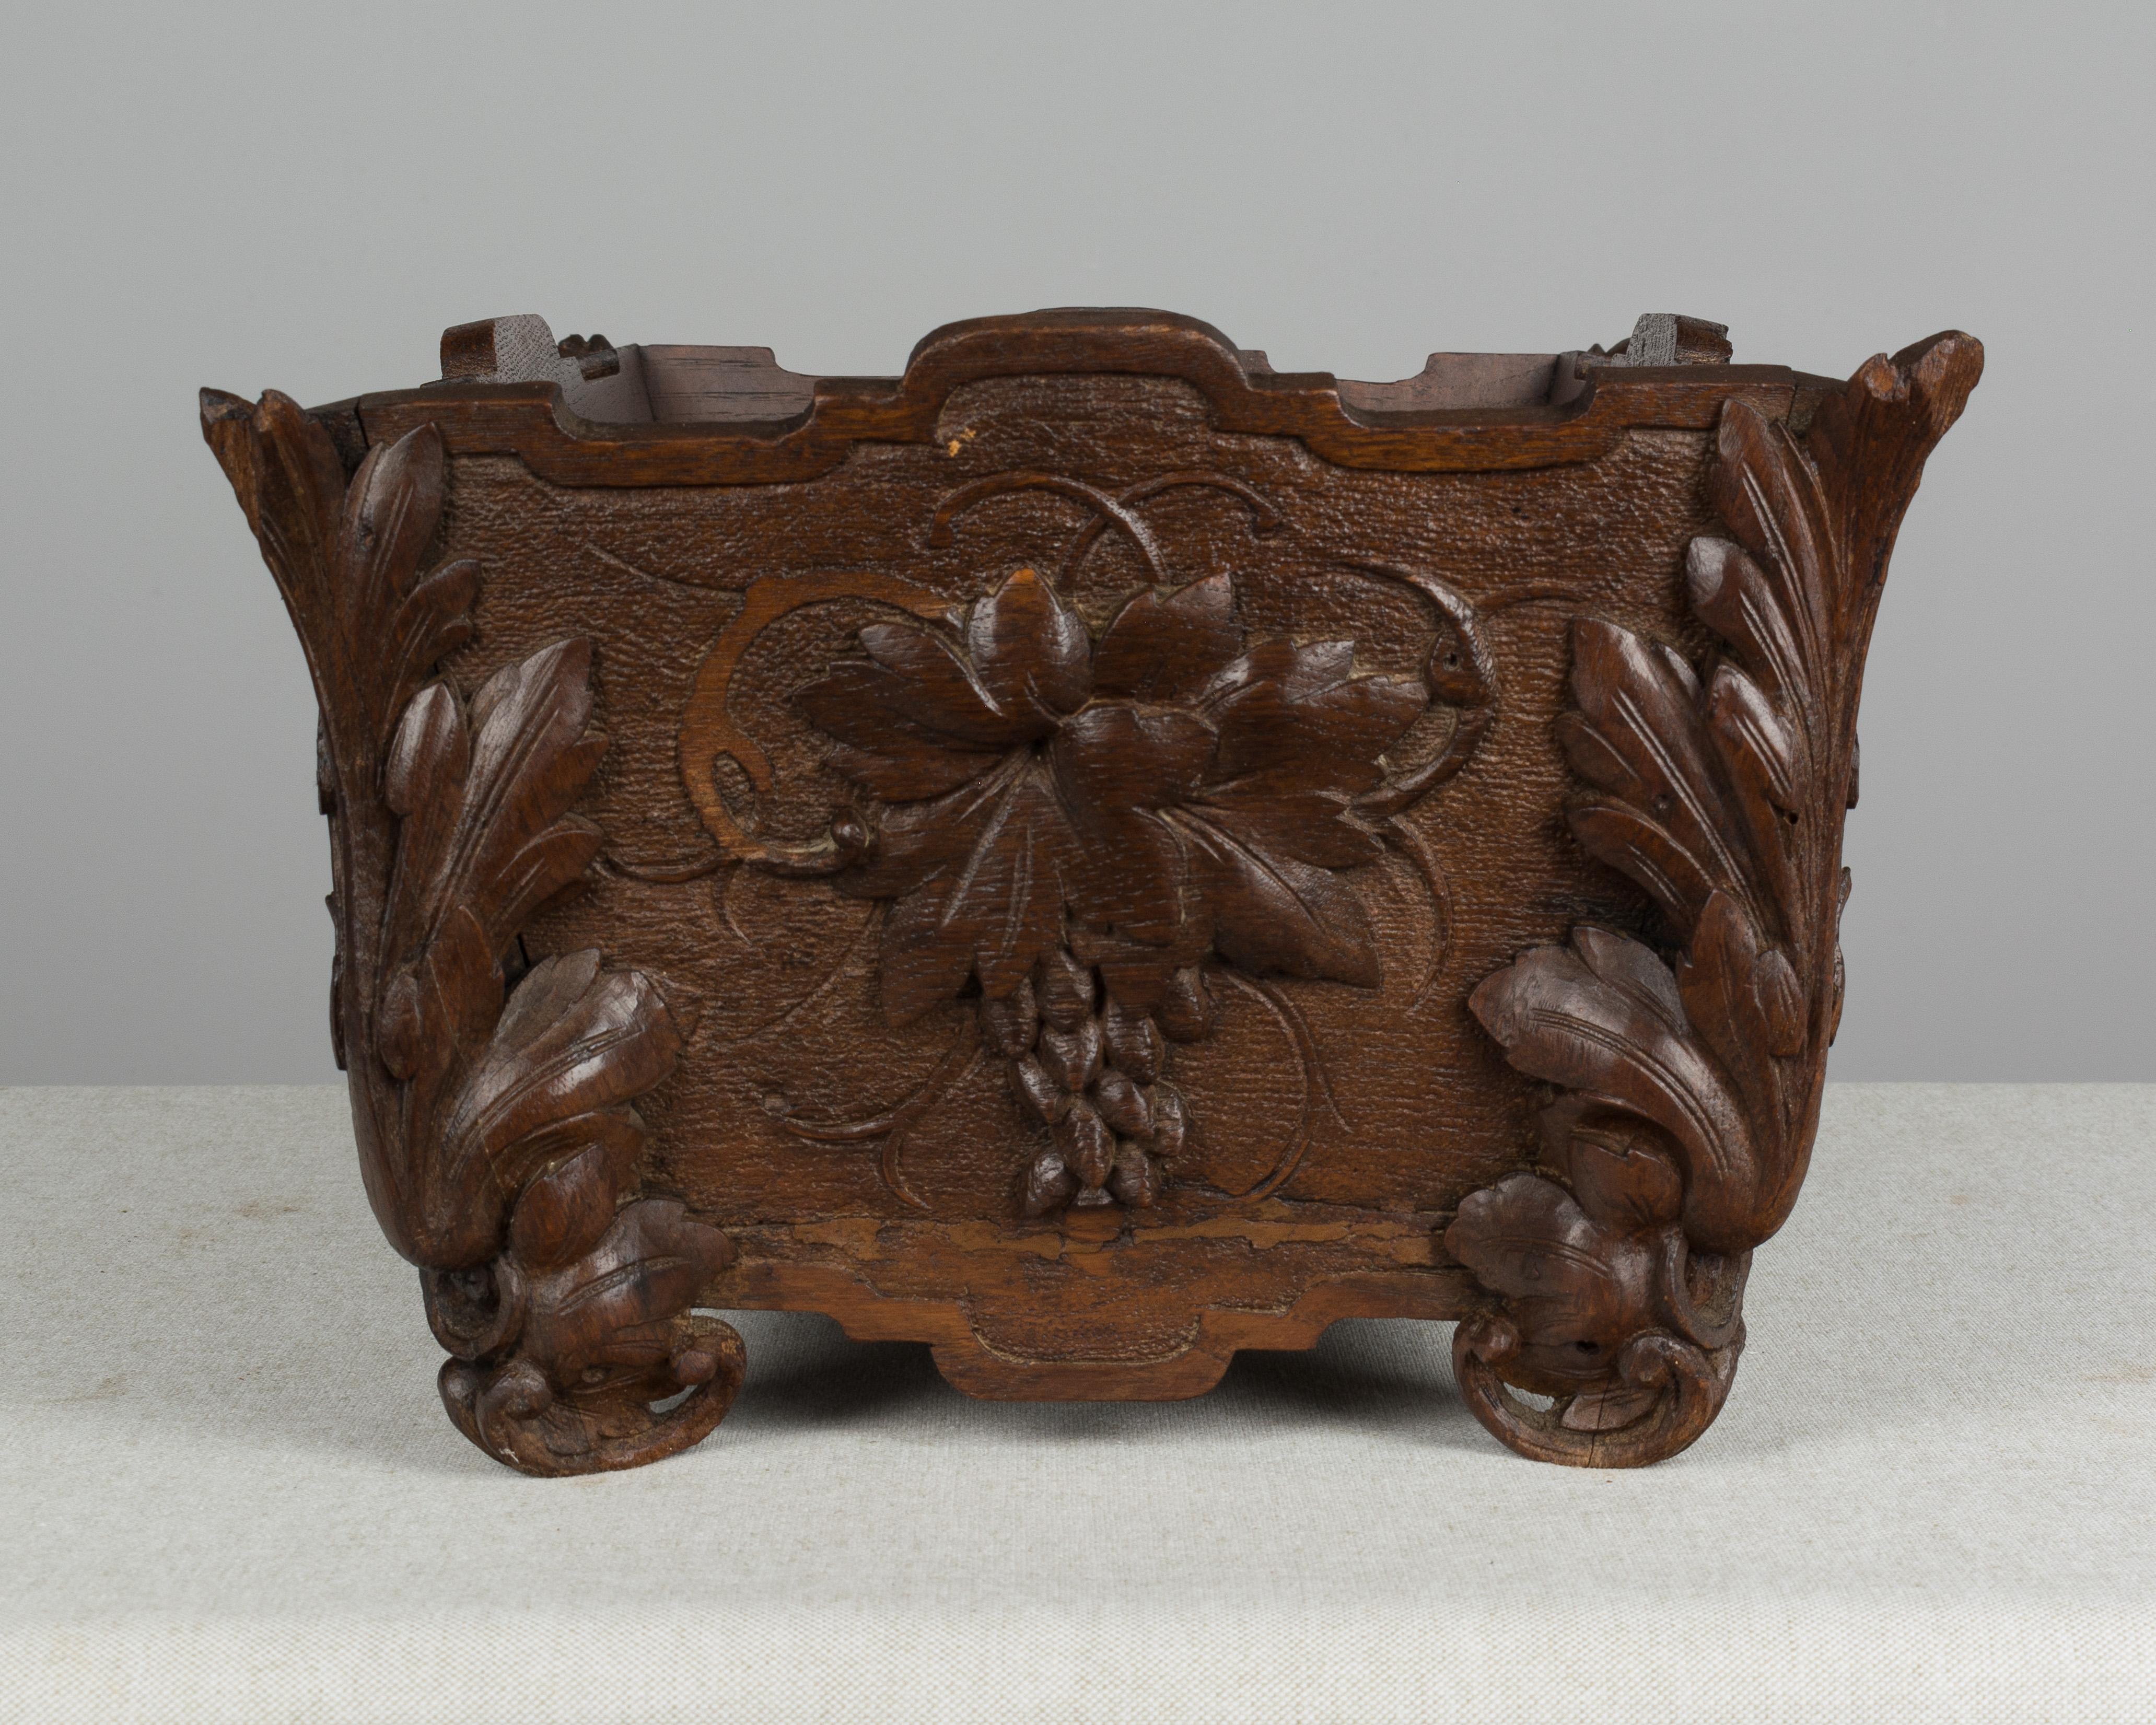 Hand-Carved 19th Century French Jardinière or Planter